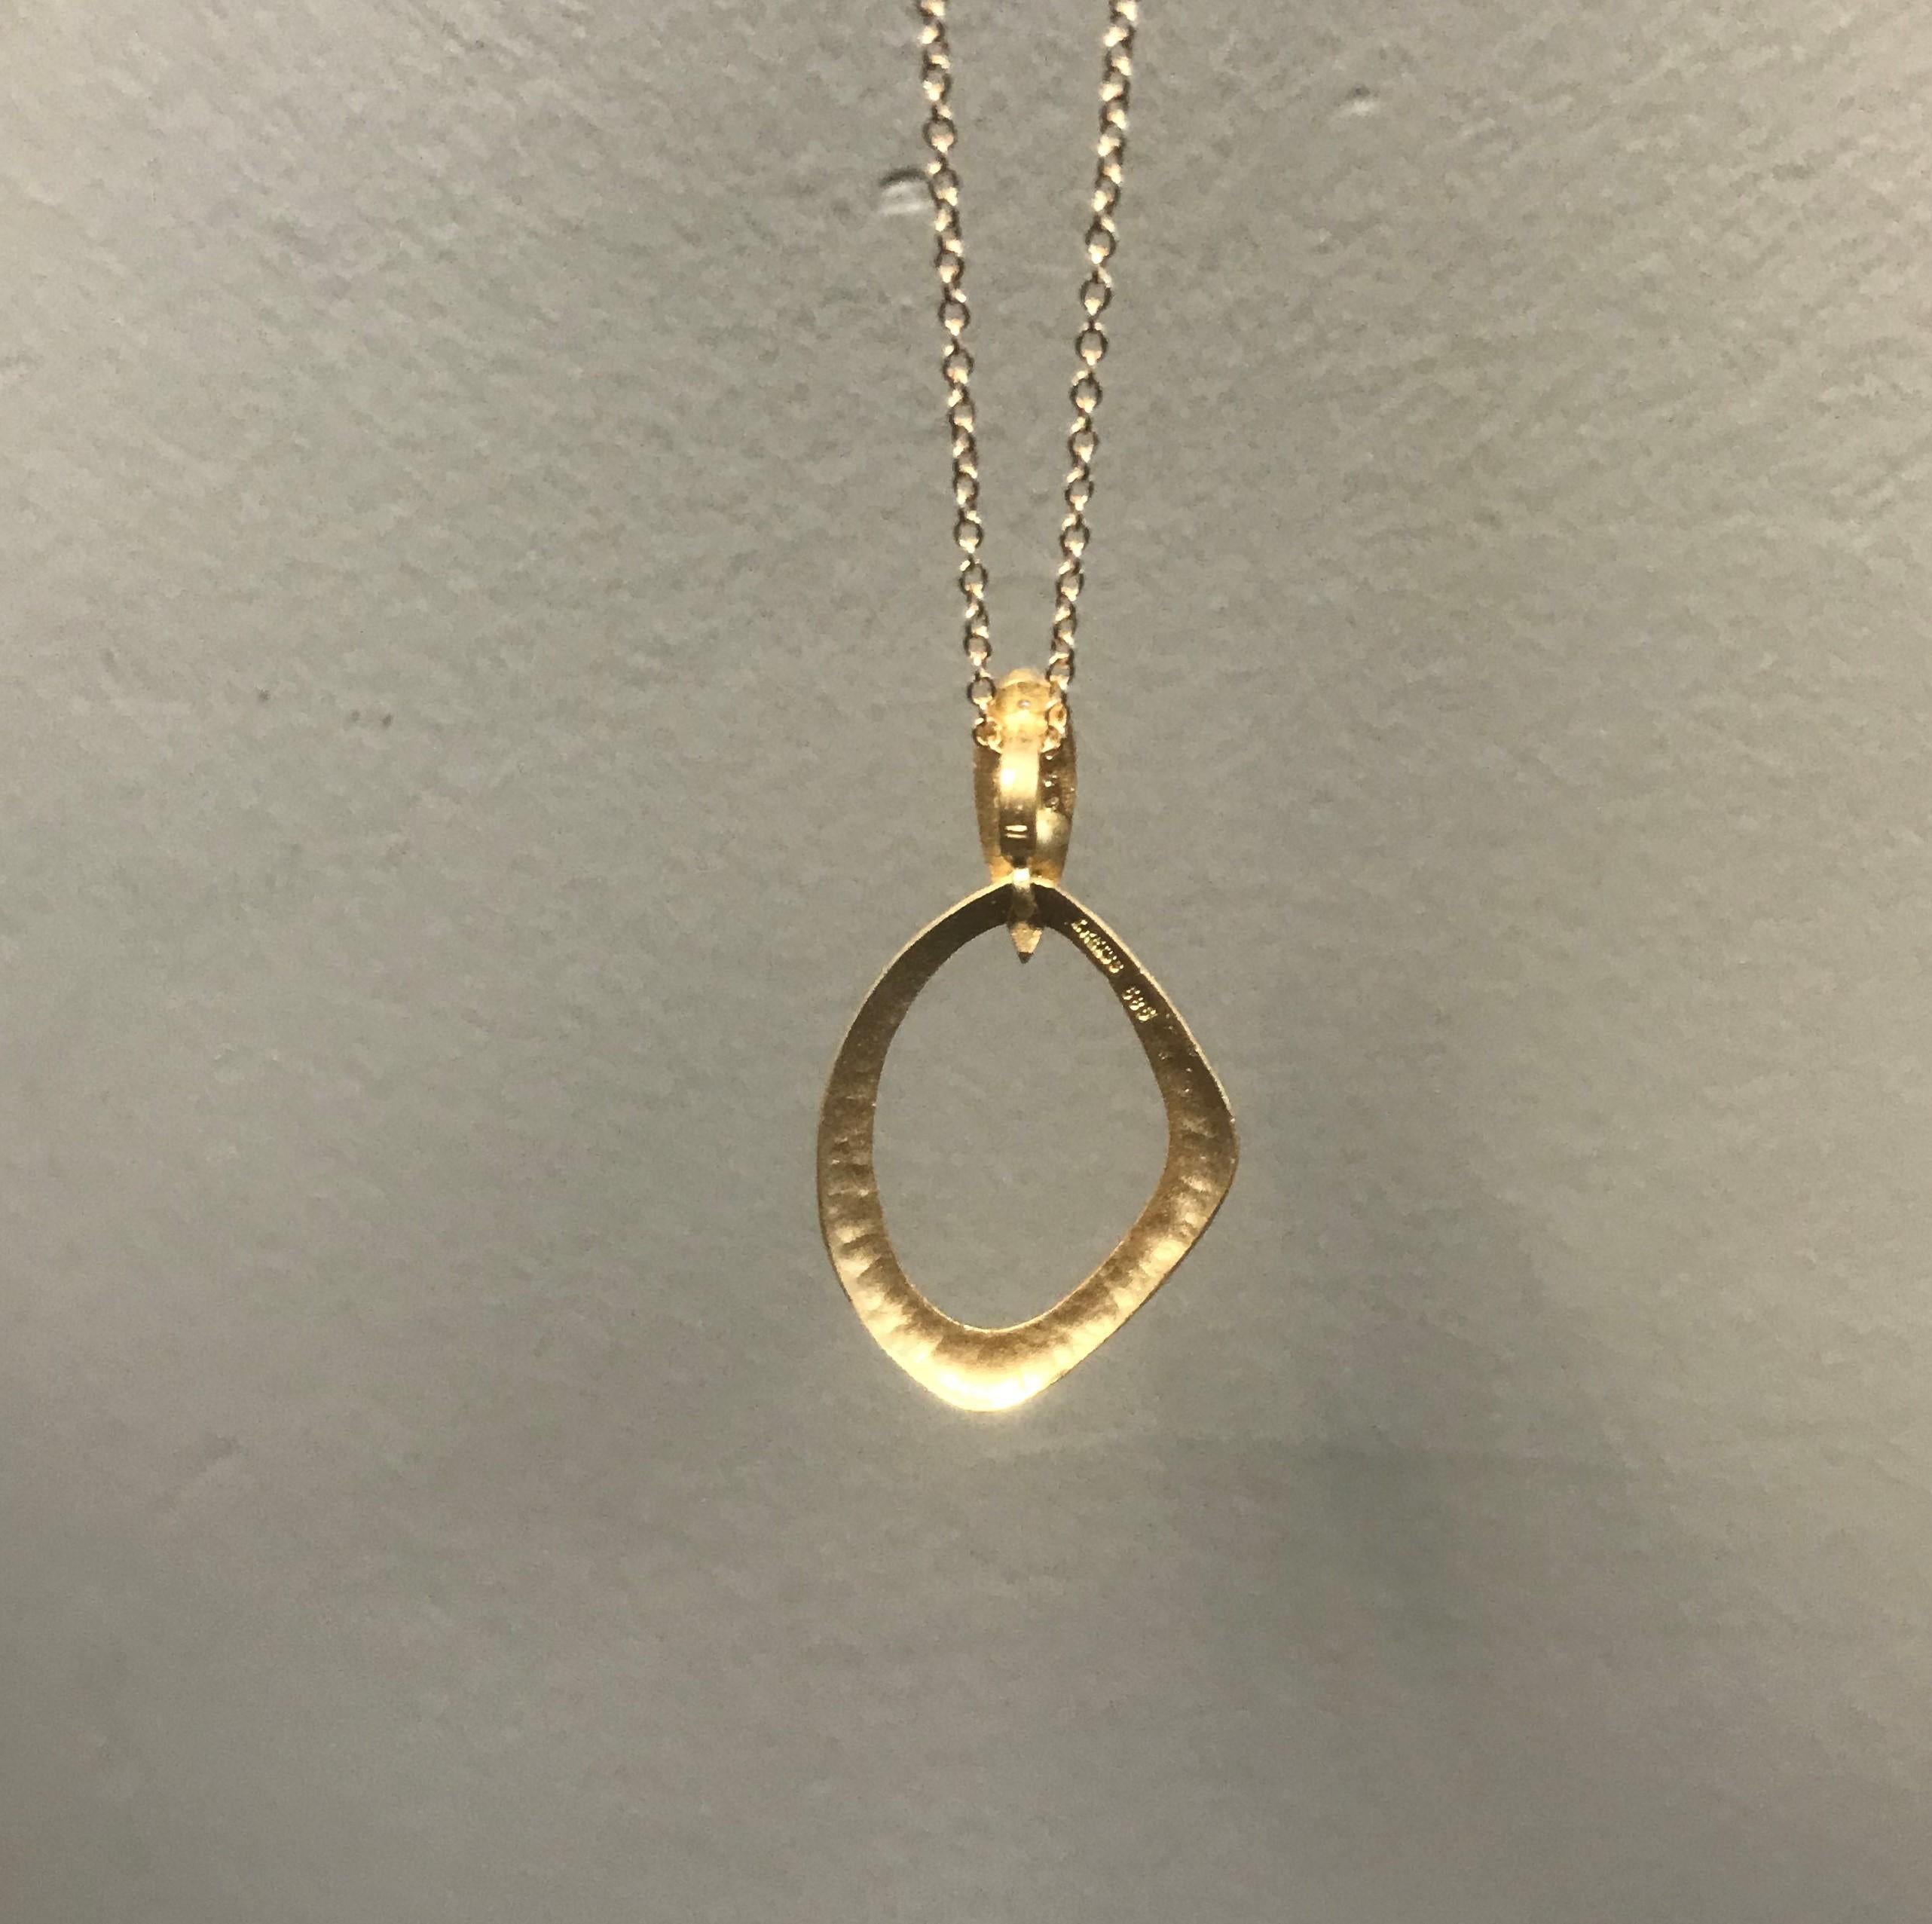 Women's Handcrafted 14 Karat Yellow Gold Hammered Pendant Accented with Diamonds For Sale